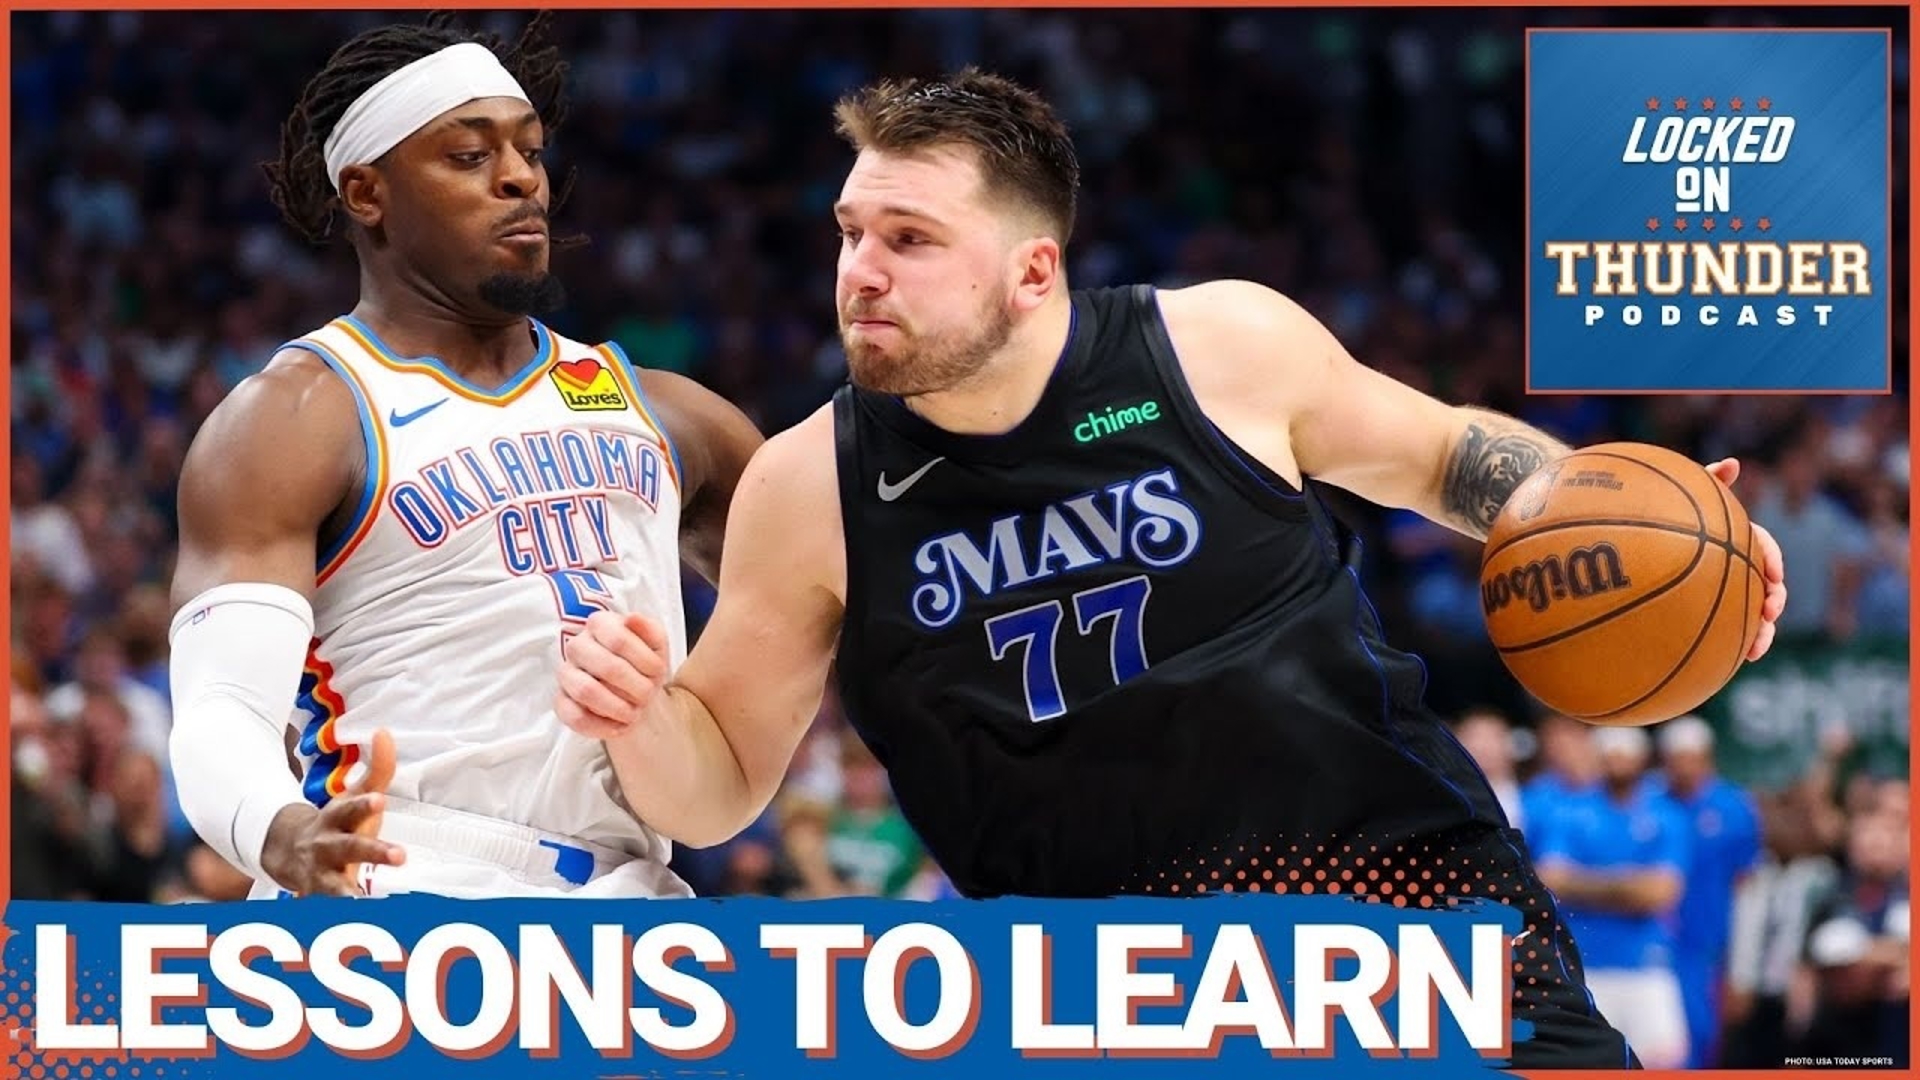 The Oklahoma City Thunder get bounced in the second round of the NBA Playoffs at the hands of the Dallas Mavericks with important lessons to learn.